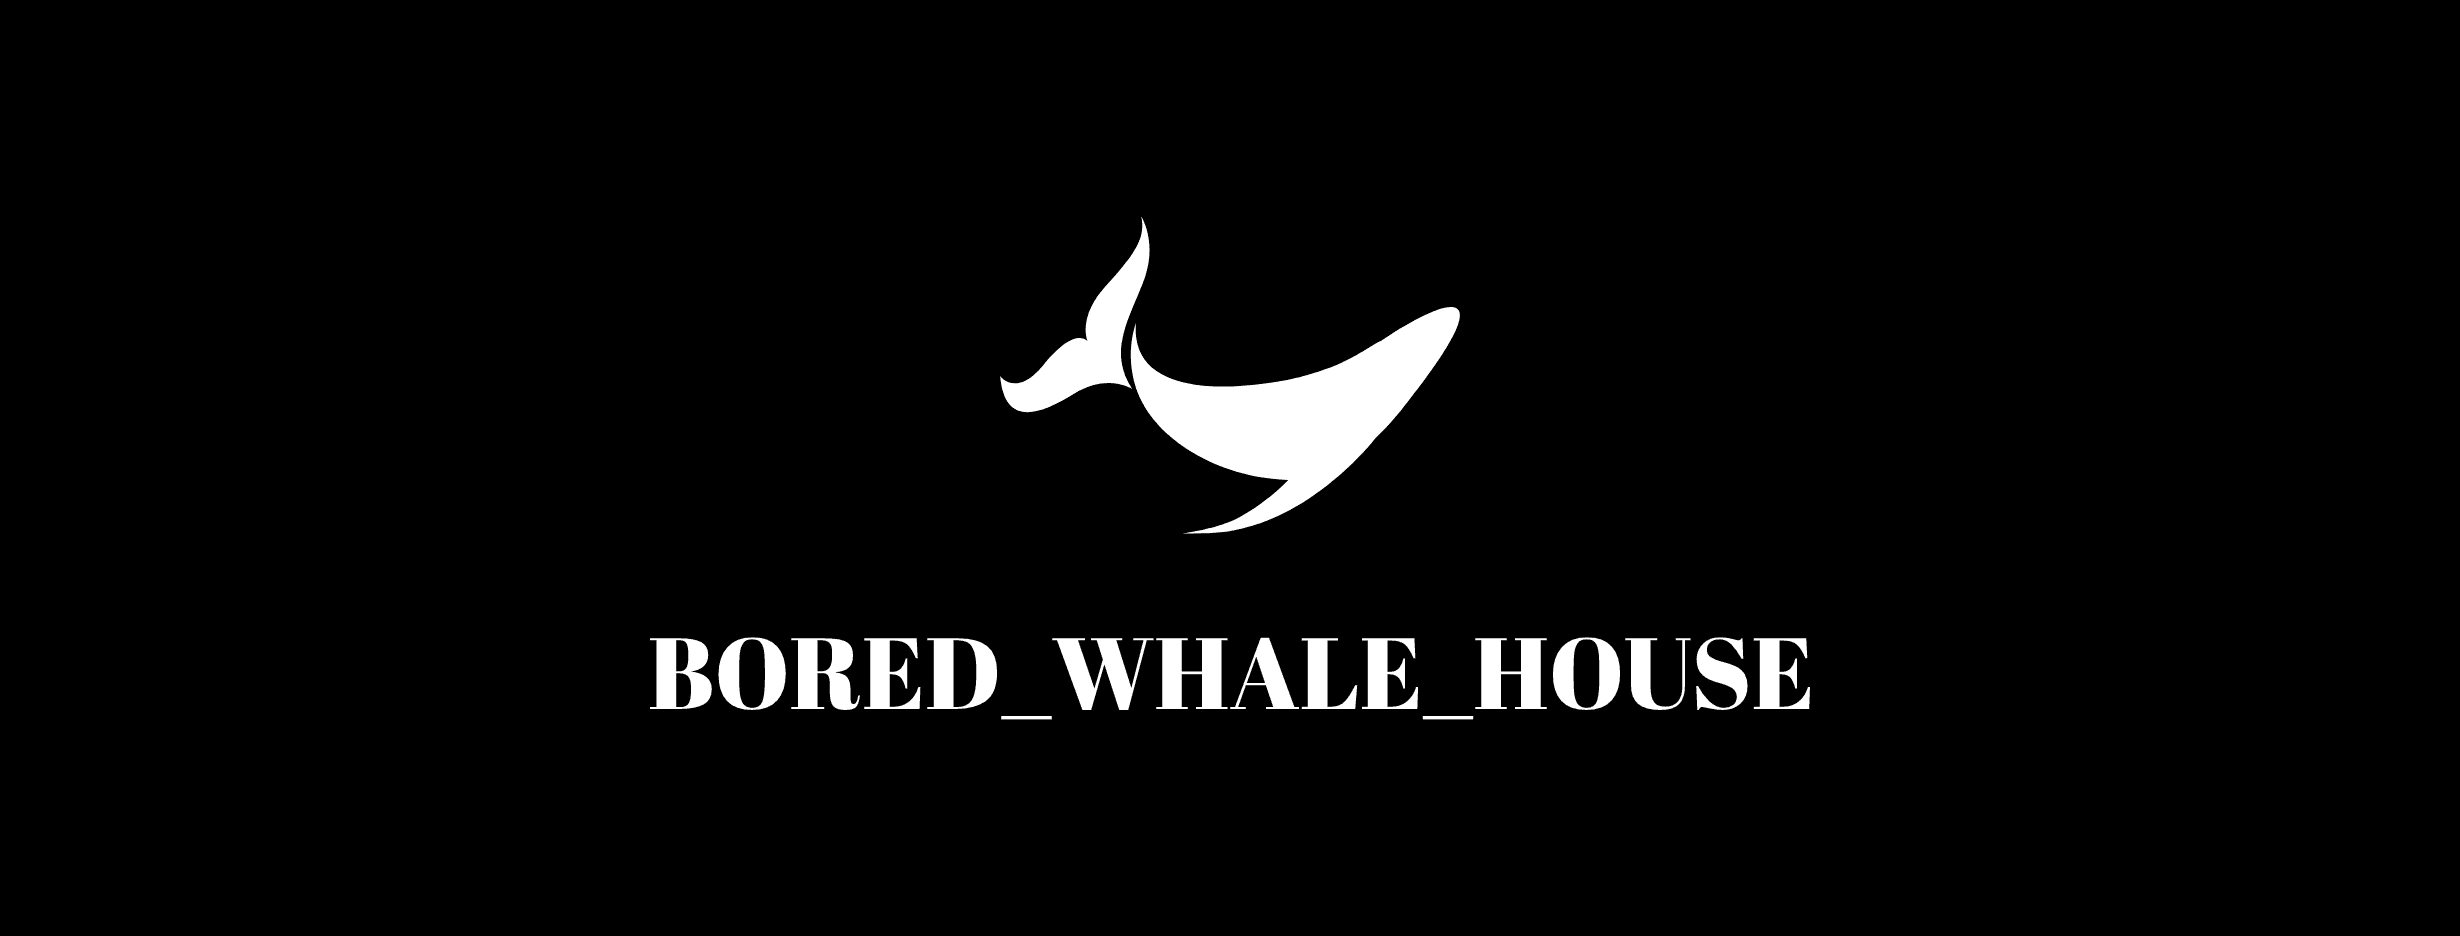 THE_BORED_WHALE 橫幅